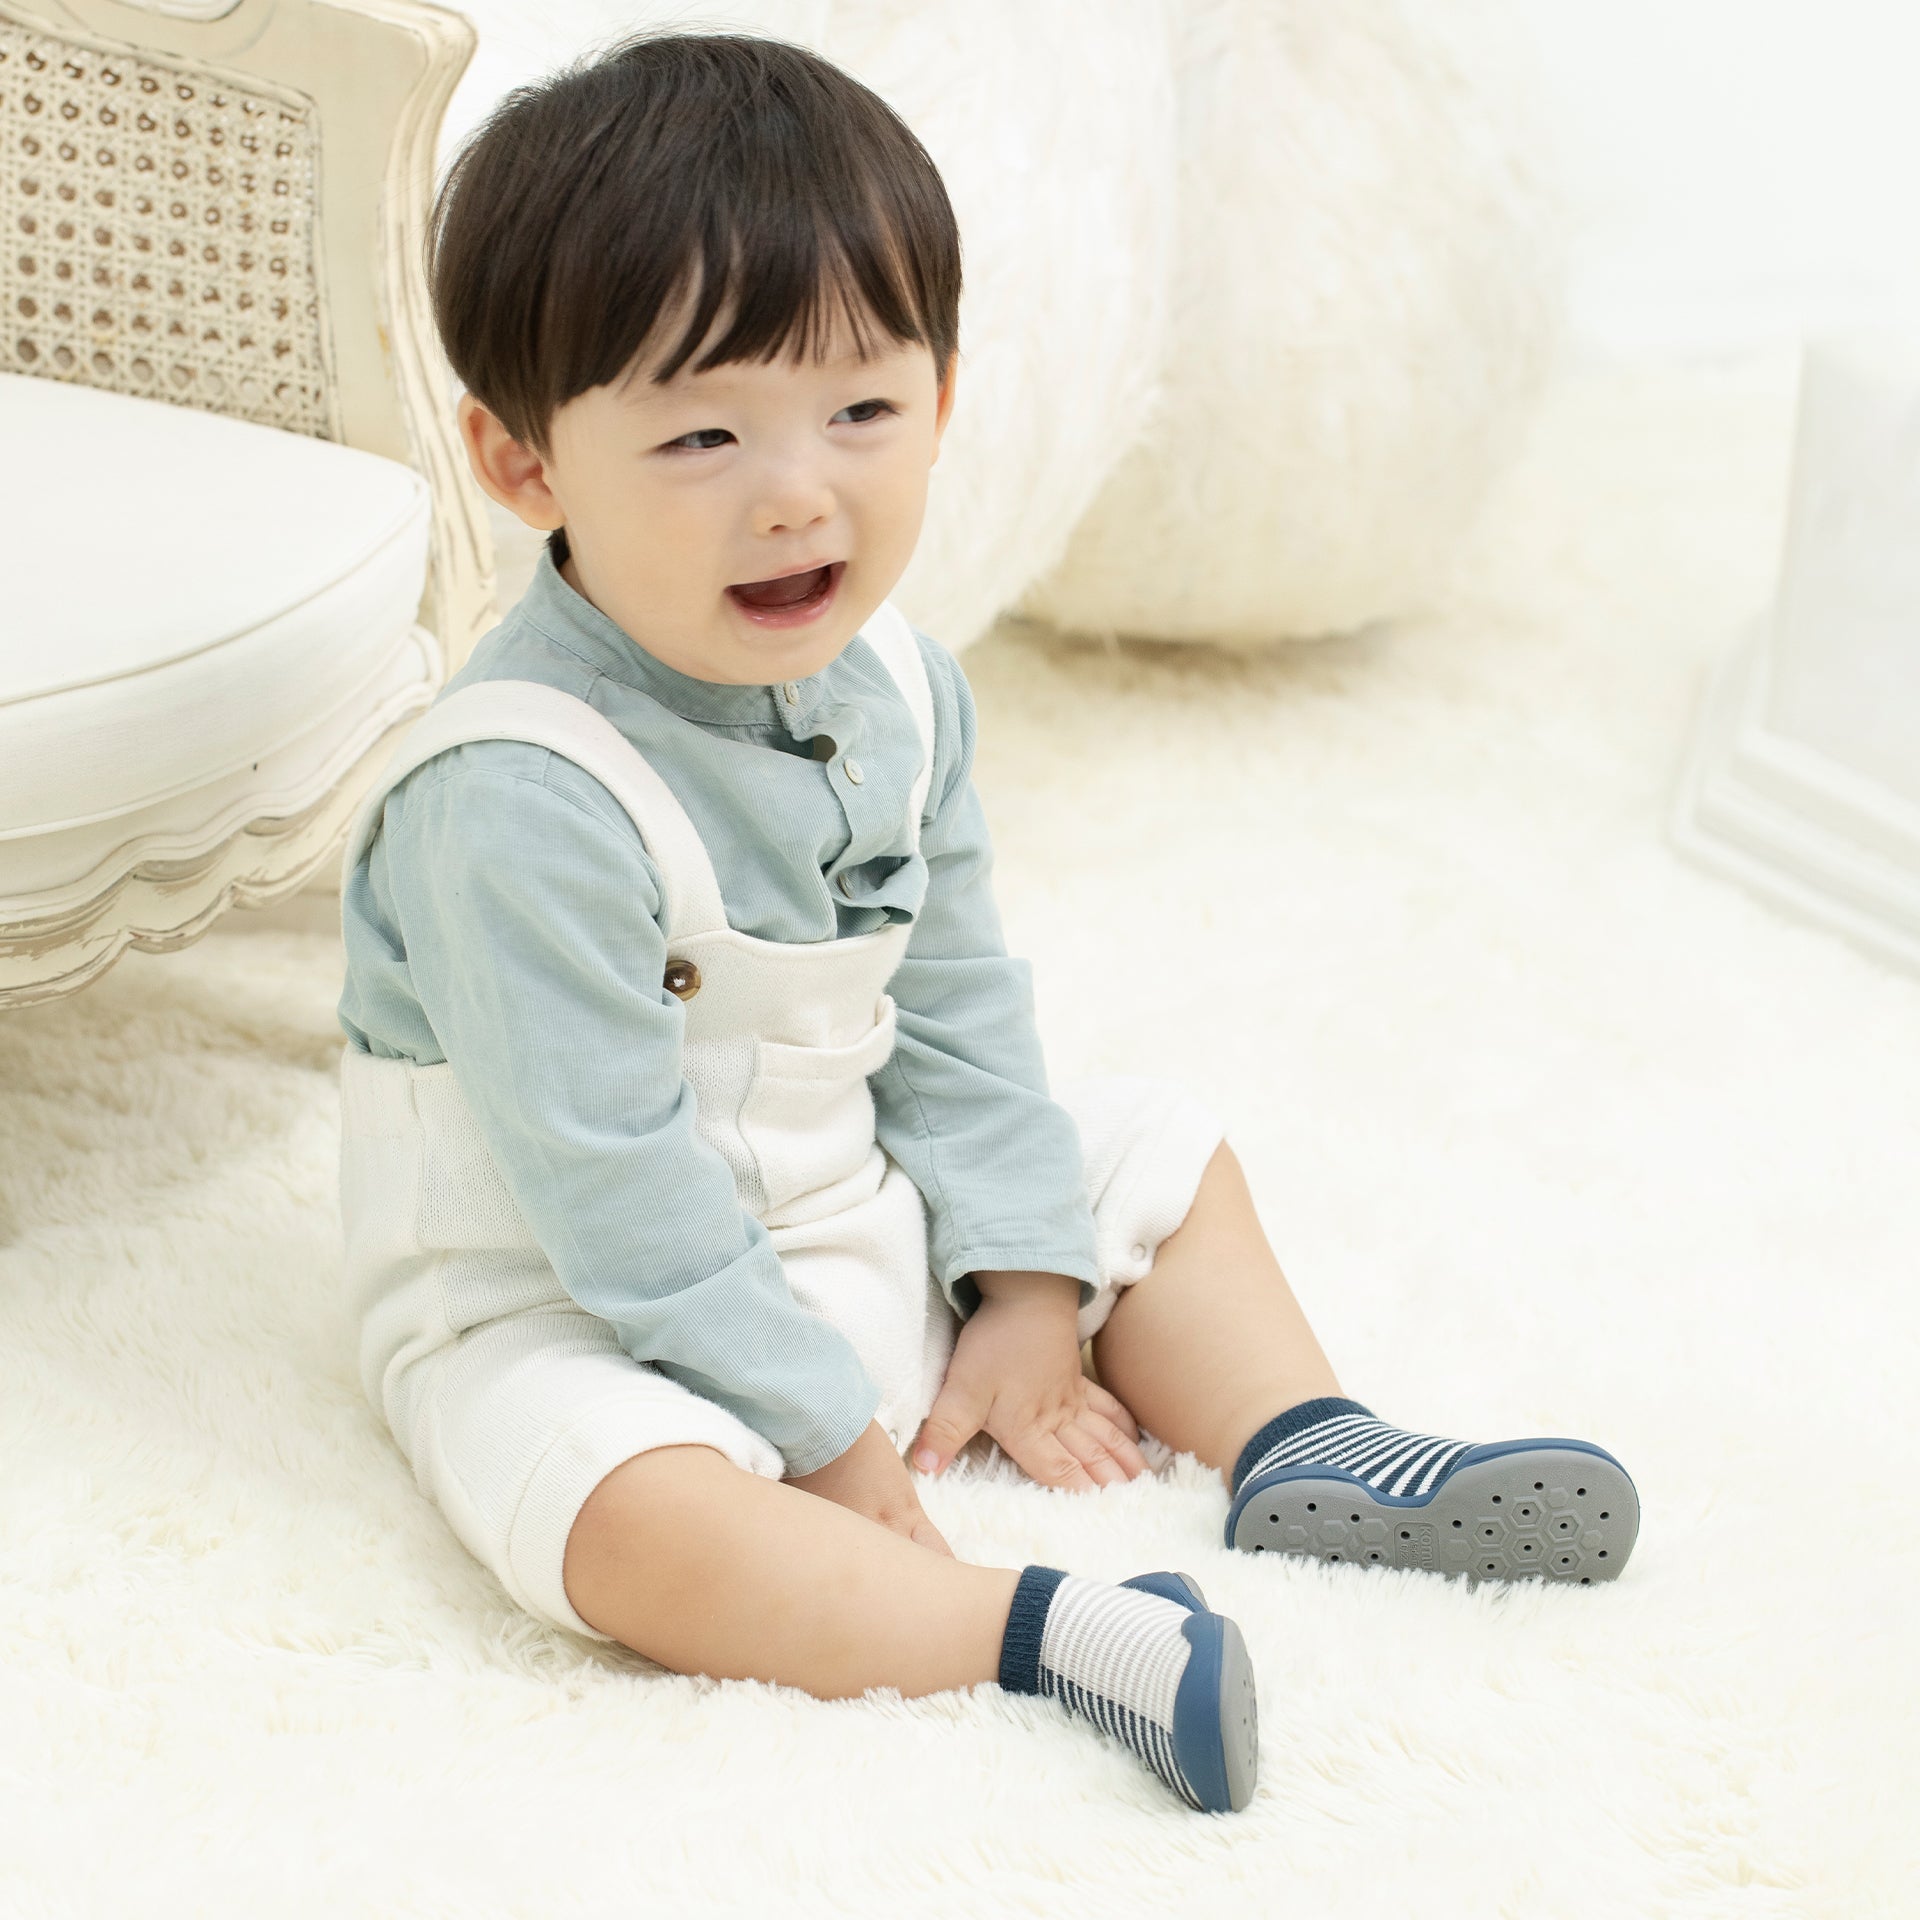 Komuello baby toddler firstwalker sock shoes: breathable, washable - Shark  Tank